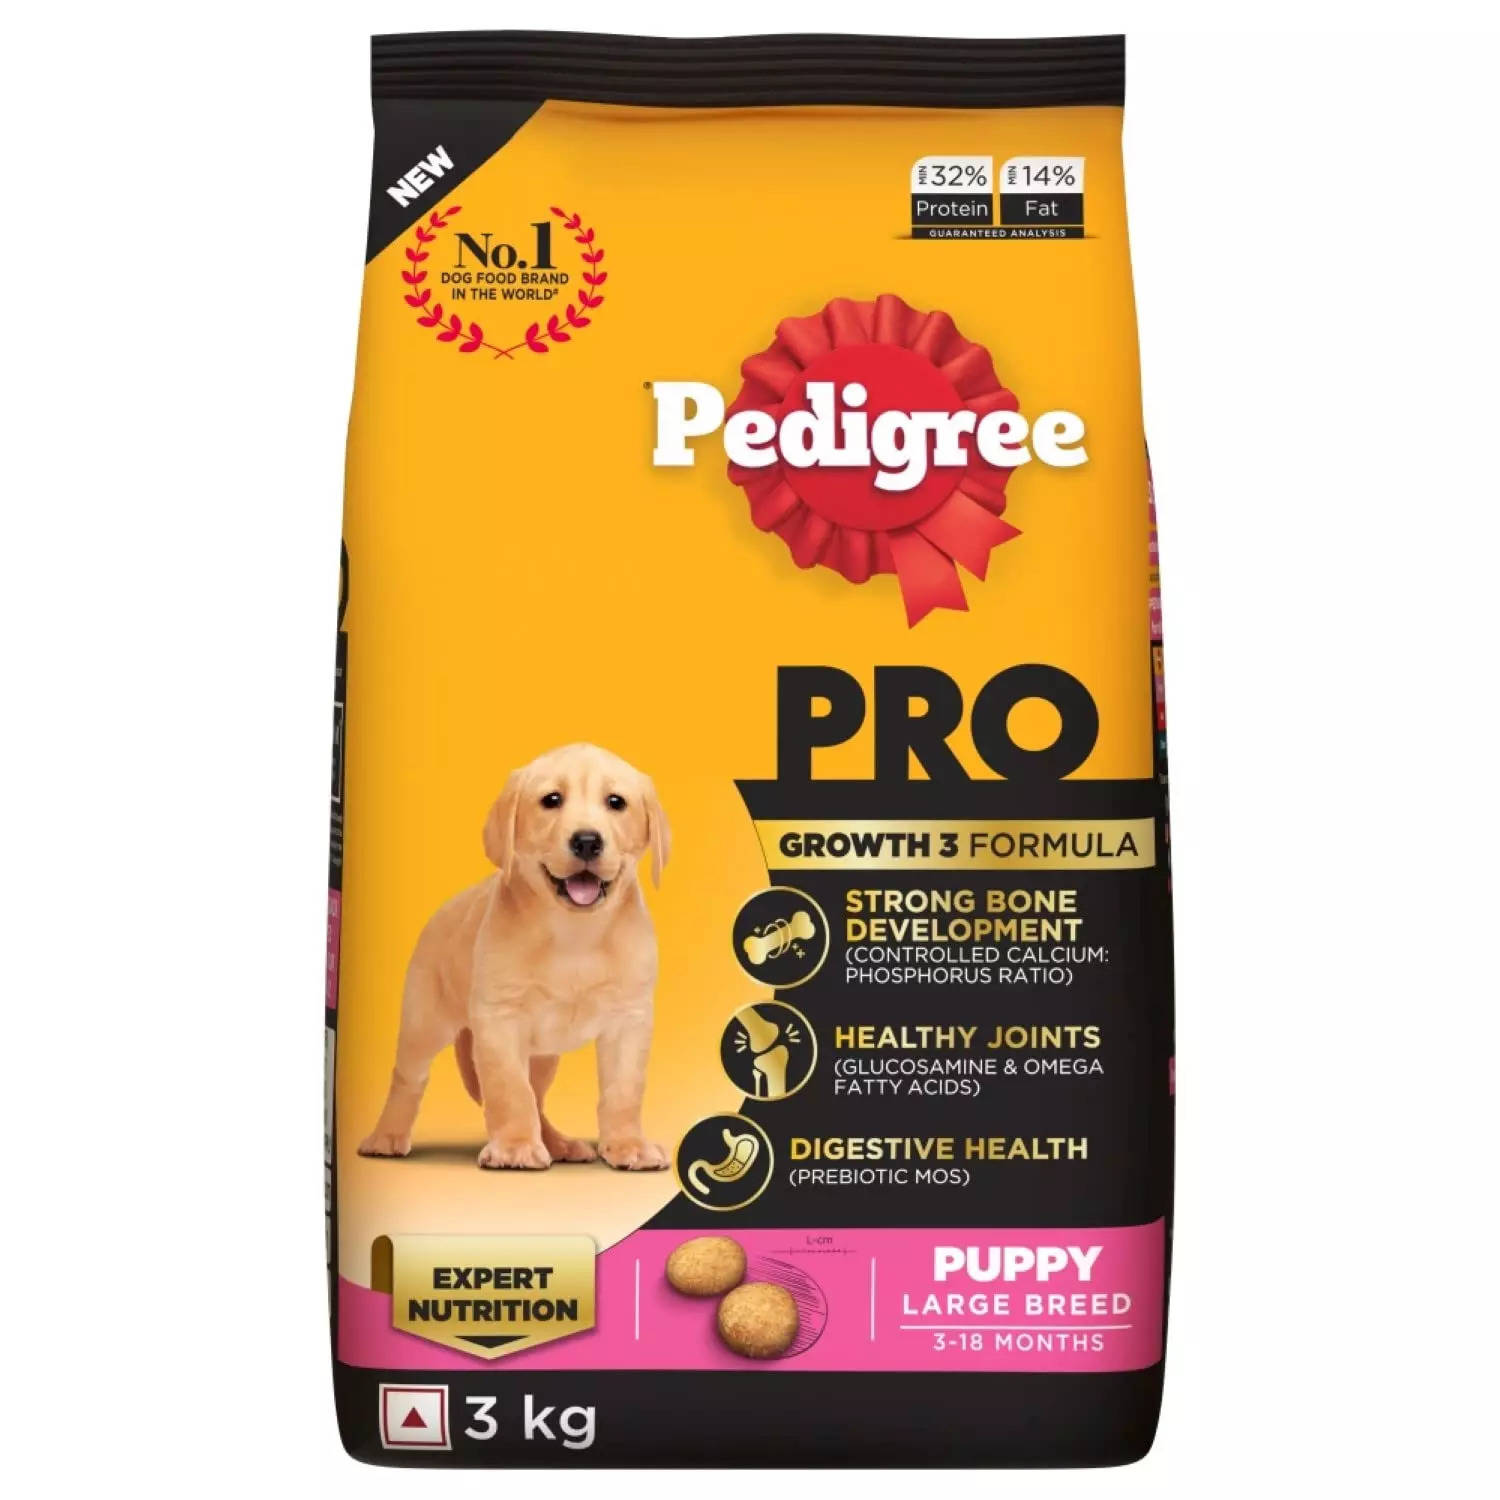 Best puppy dog food Best Puppy Dog Food for the Tender Age of your